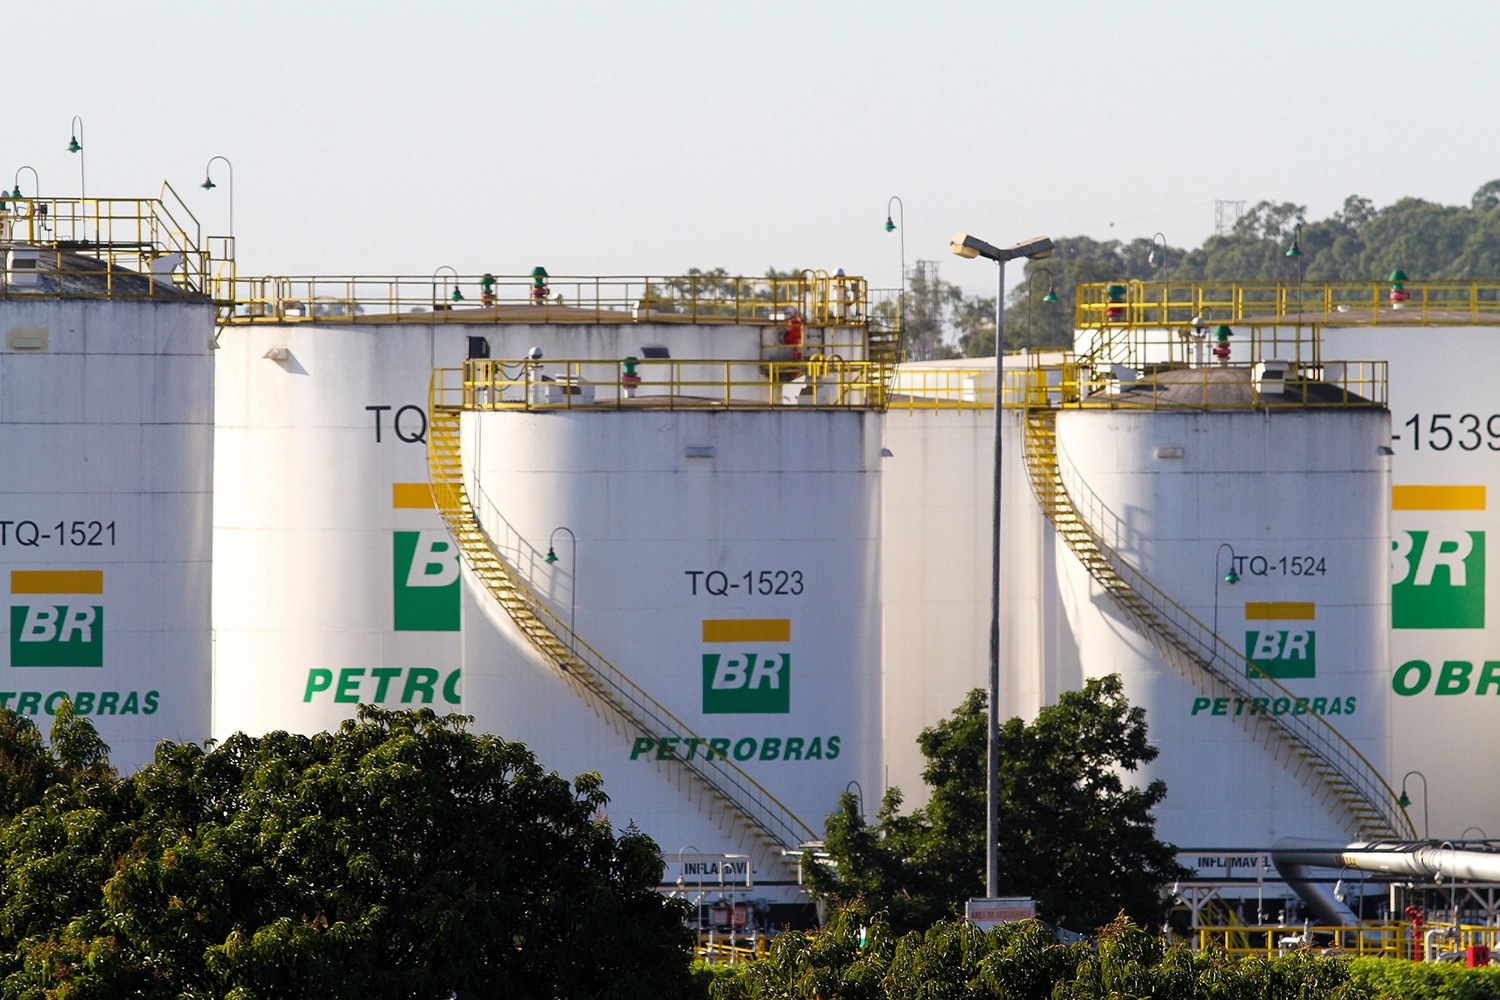 By law, Petrobras had exclusive rights to operate in the refining sector until 1997. Over the decades, Petrobras built a network of 15 refineries, 14 of which were inaugurated before the 1980s.